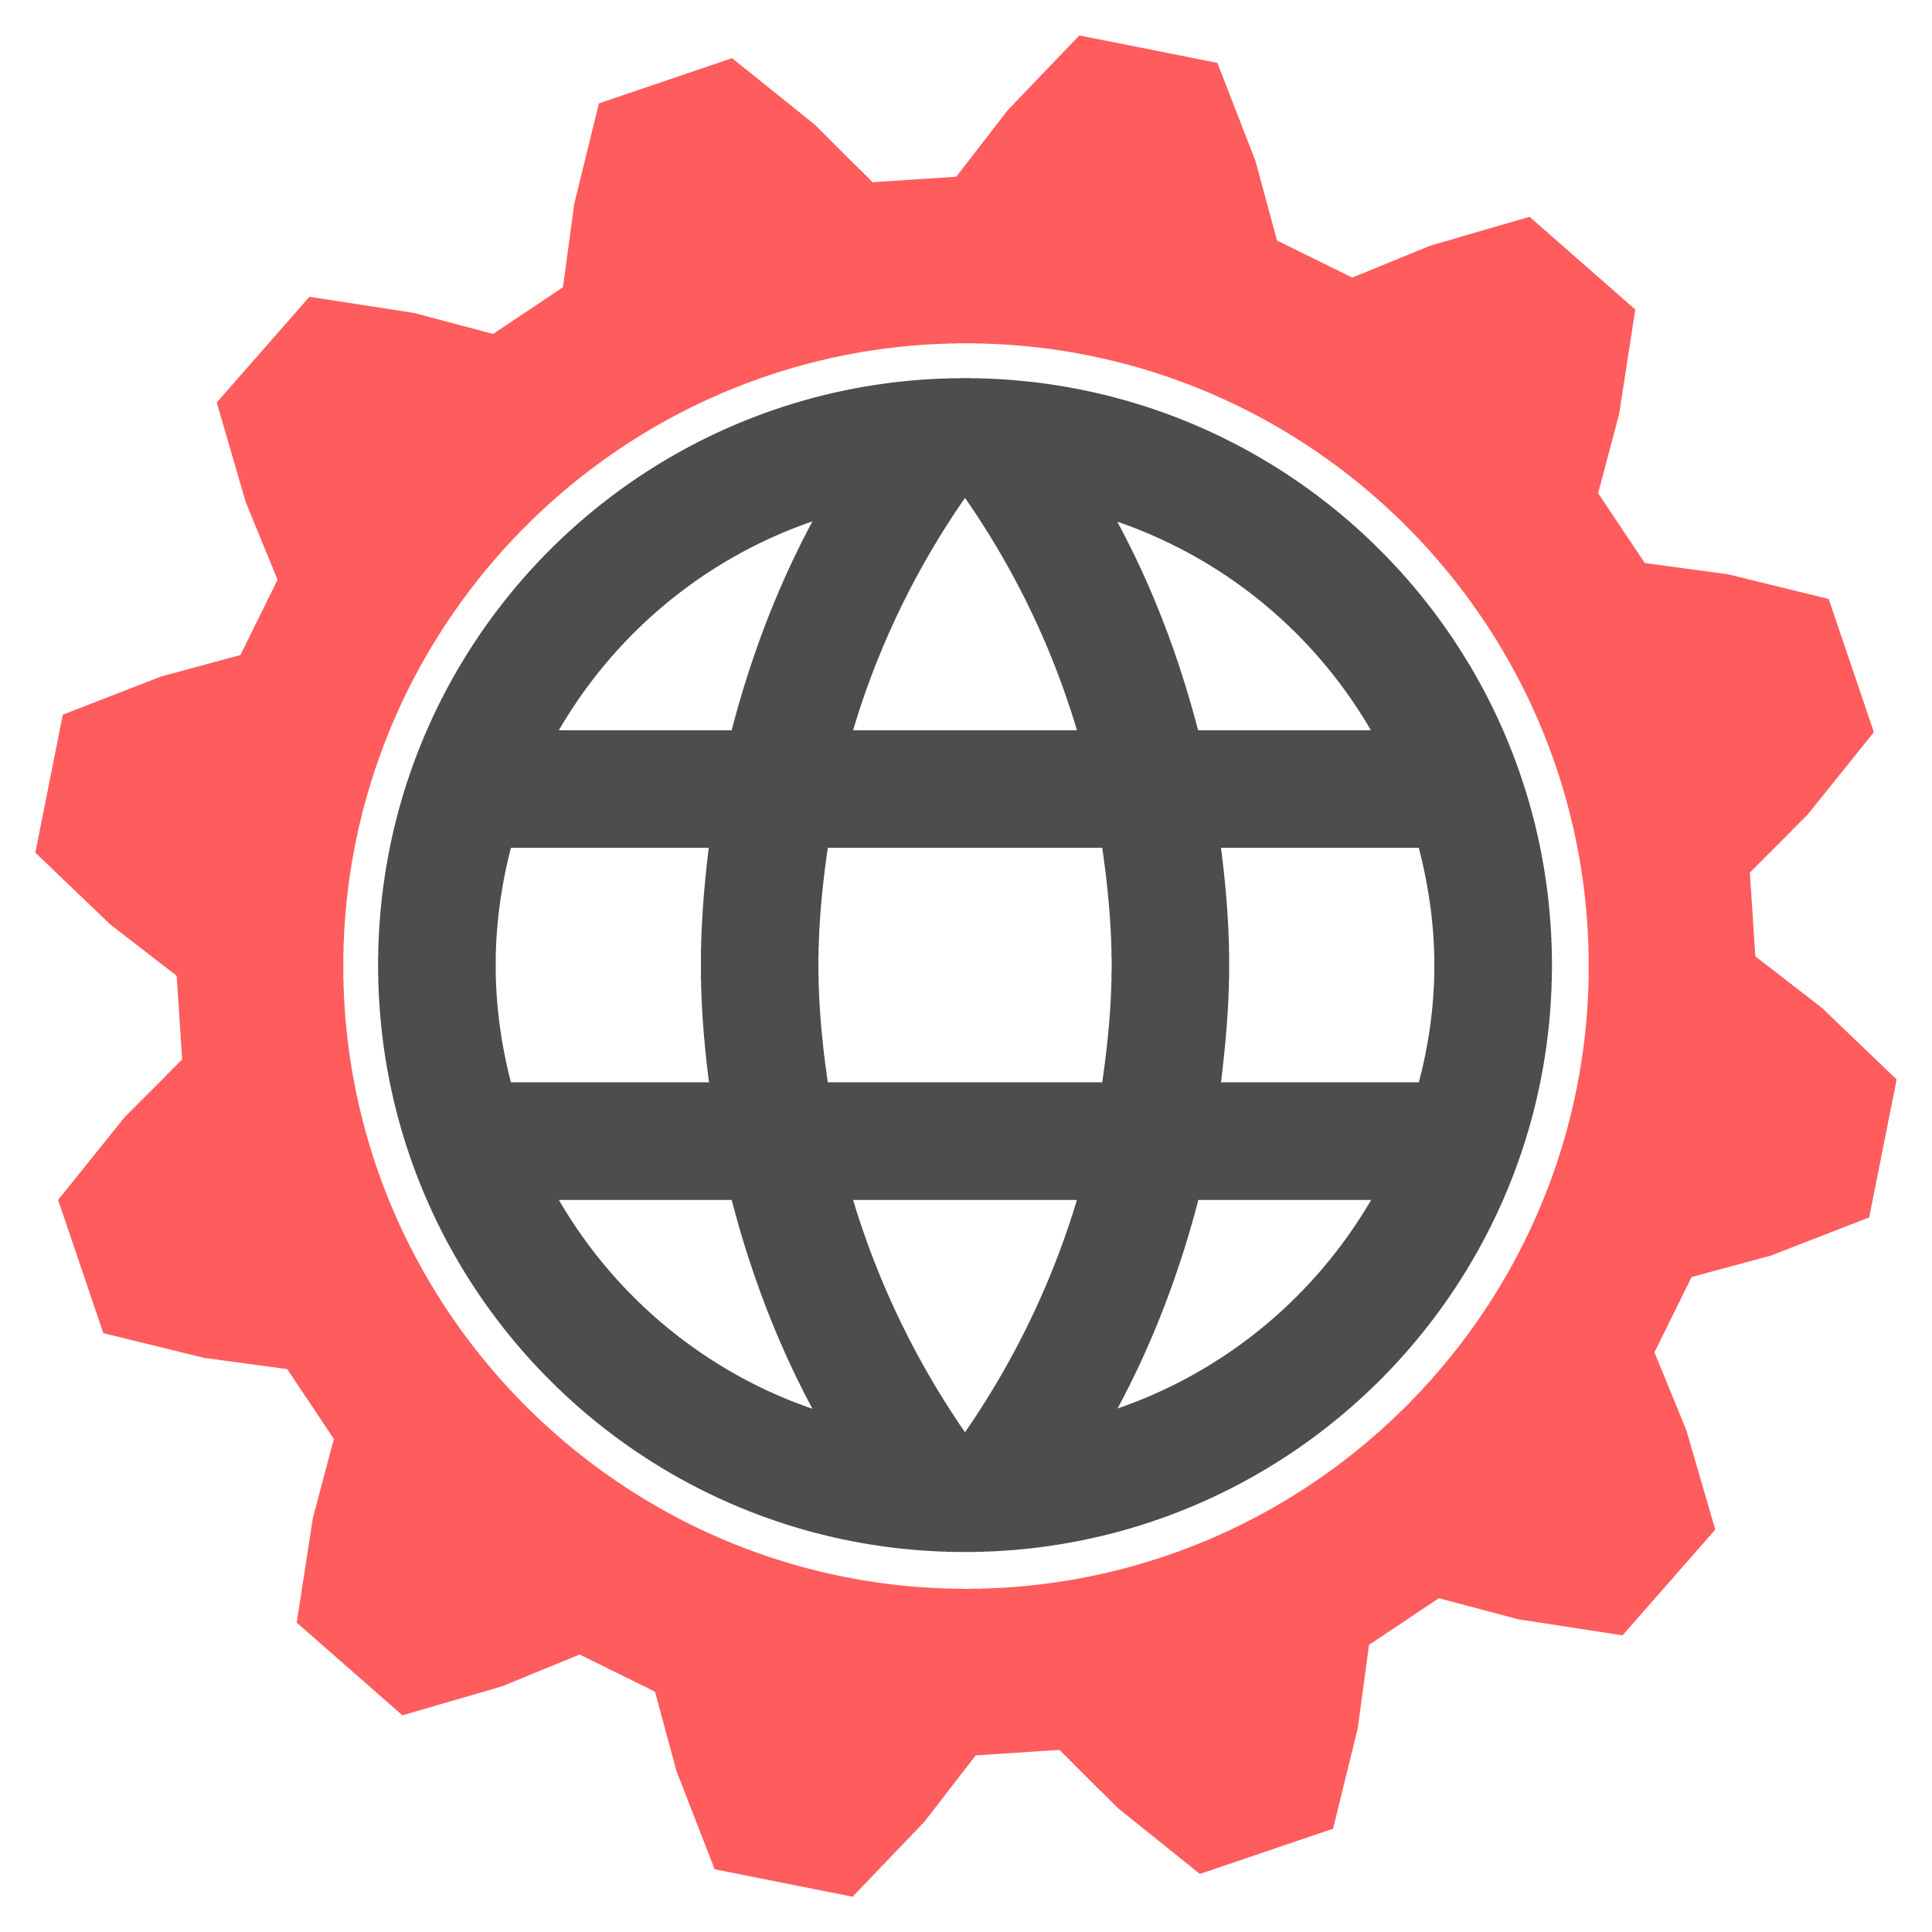 A round logo. The outside is a gear, the inside is a line-art globe thing.